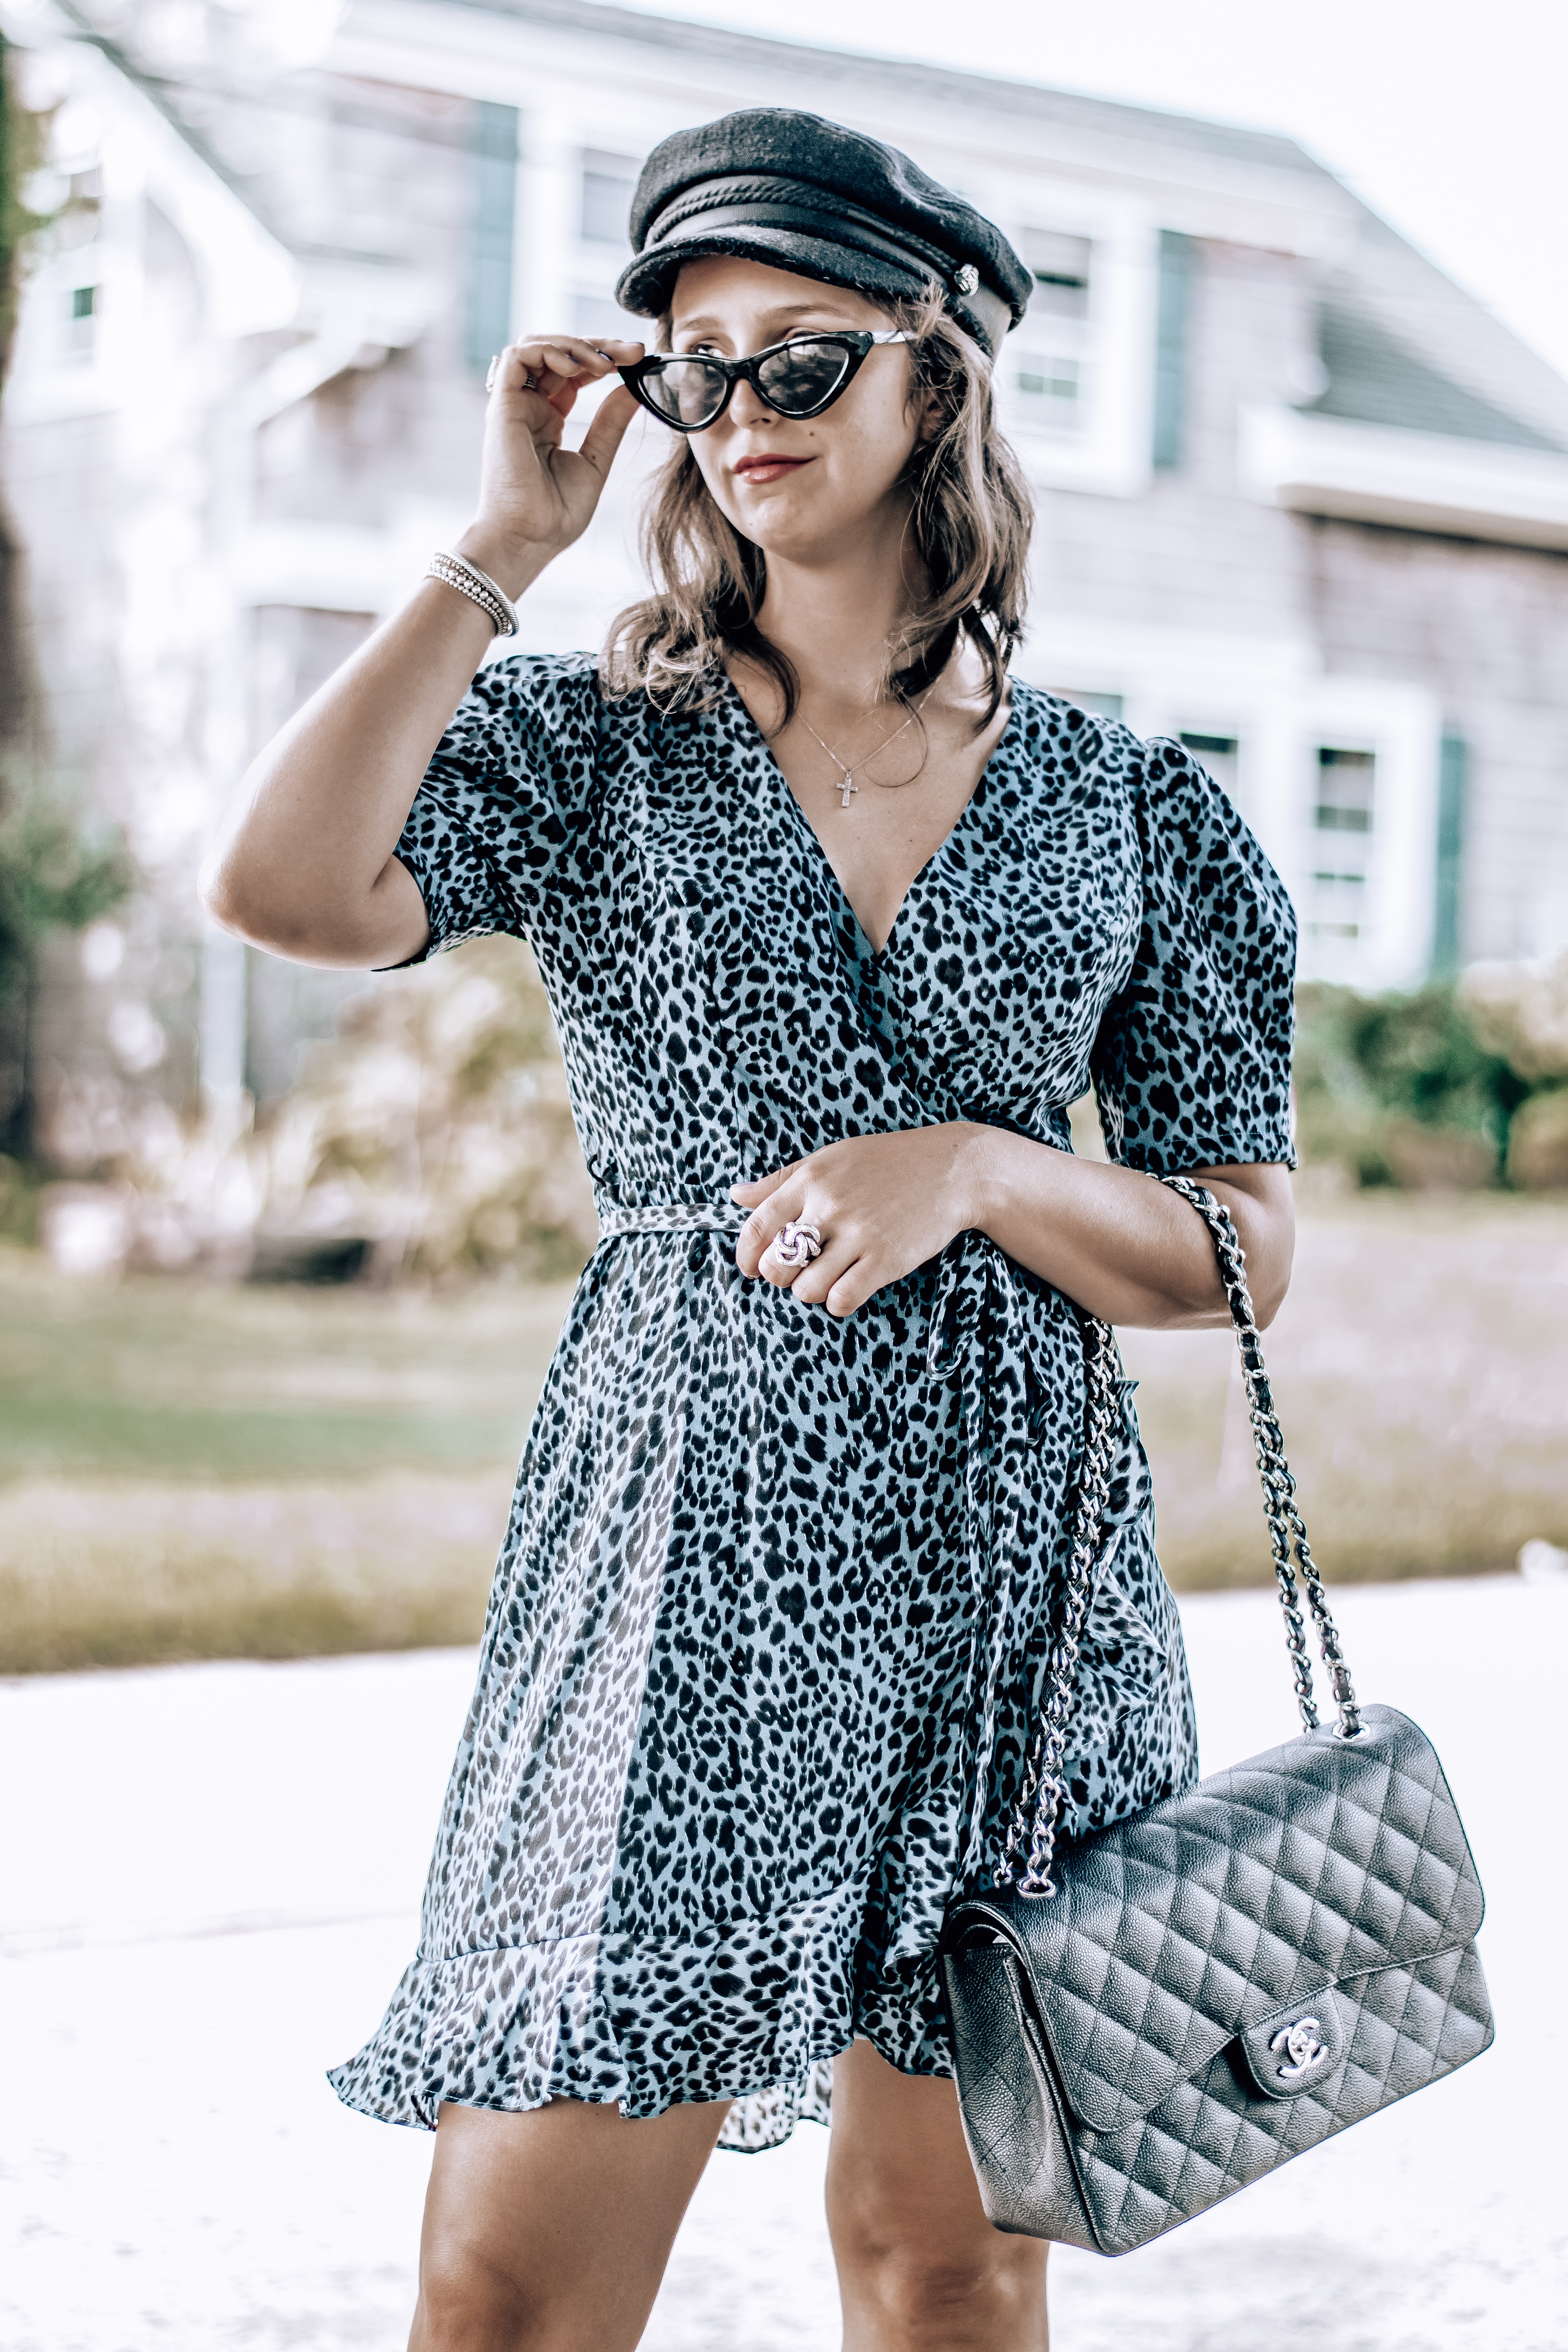 leopard dress-aqua-bloomingdales-chanel double flap- simply by simone-style-blogger